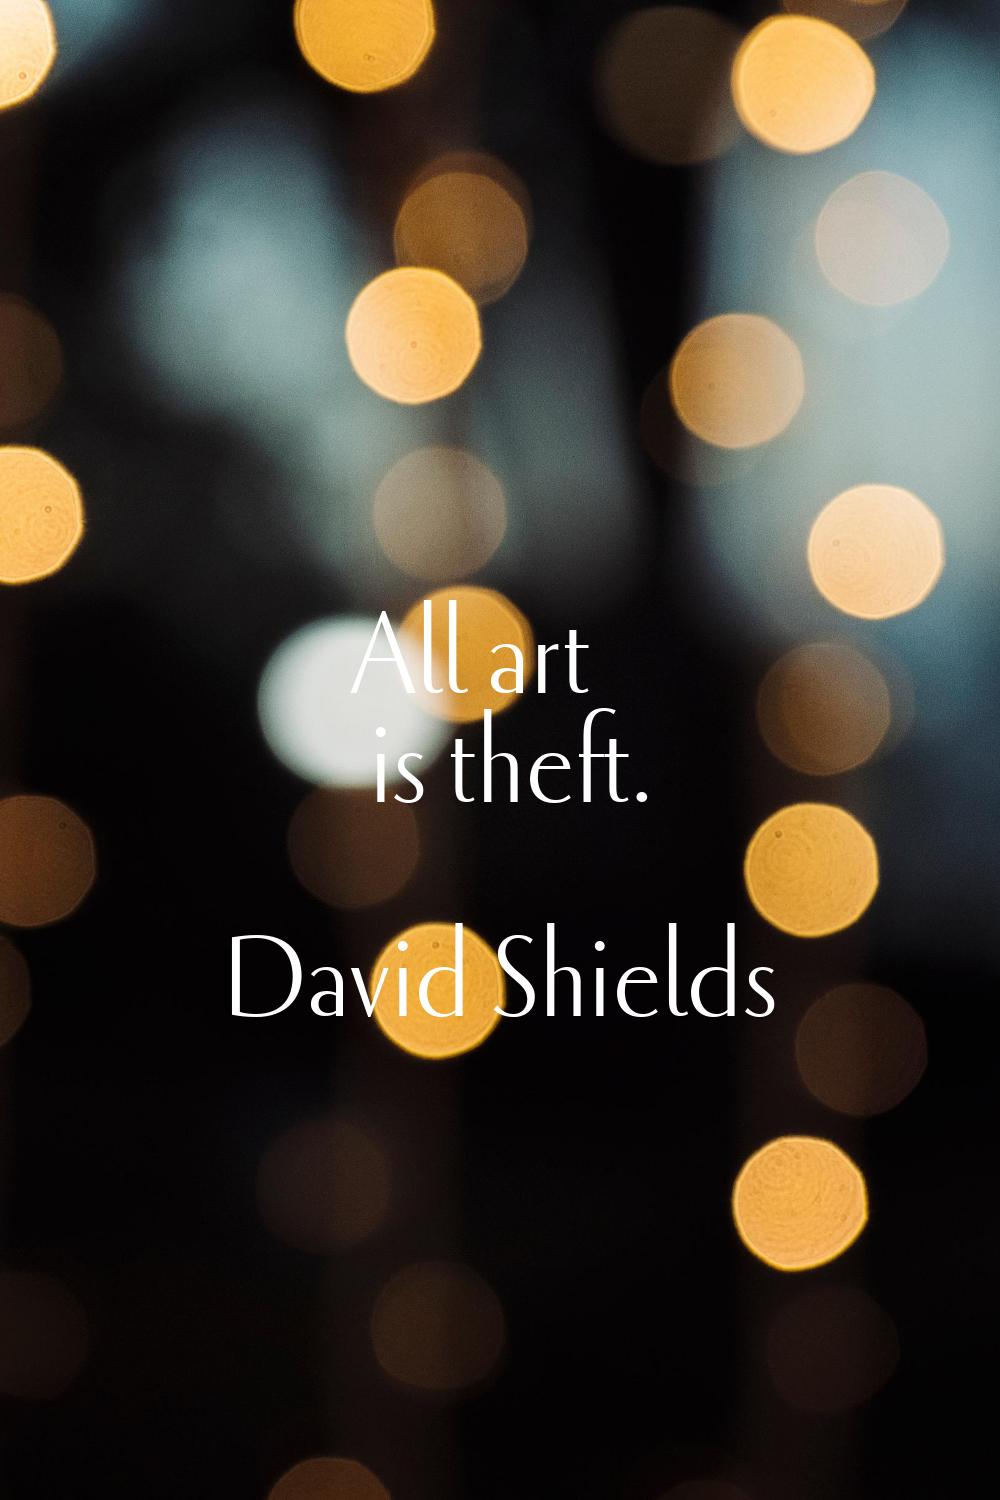 All art is theft.